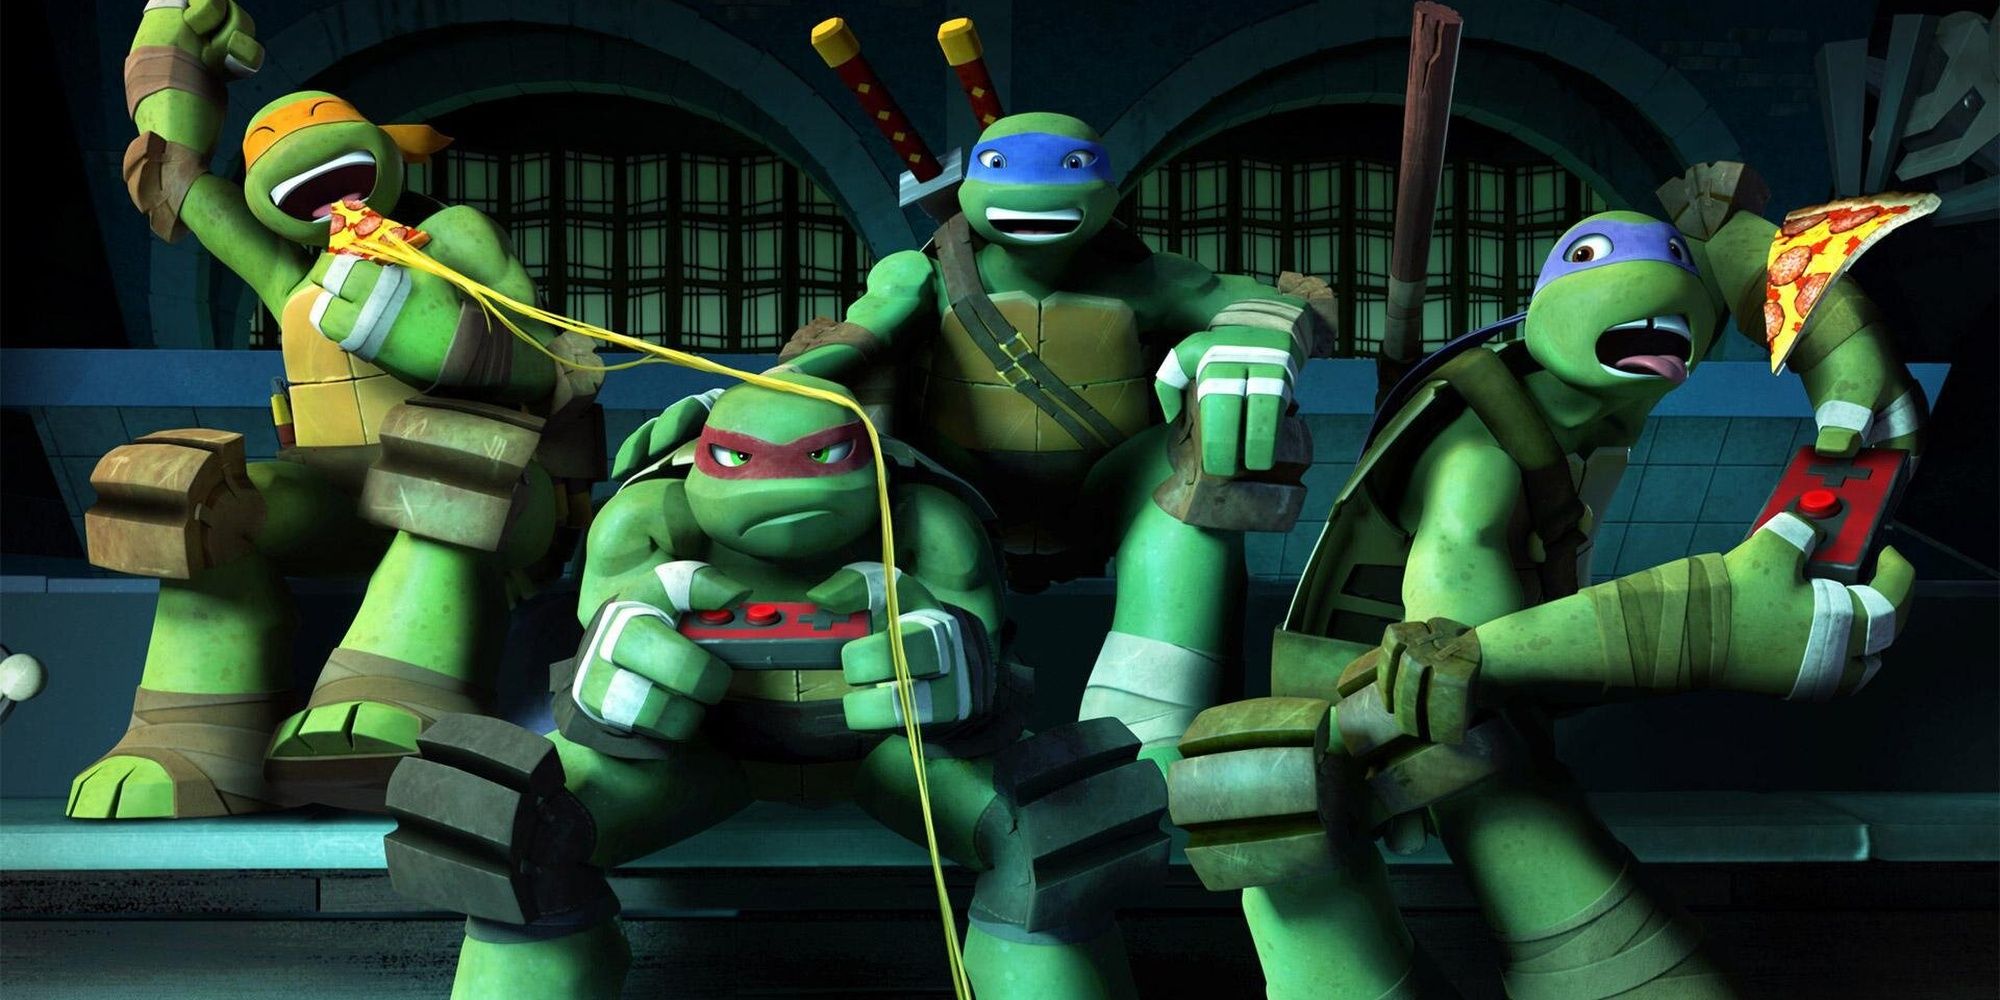 The Ninja Turtle brothers hanging out